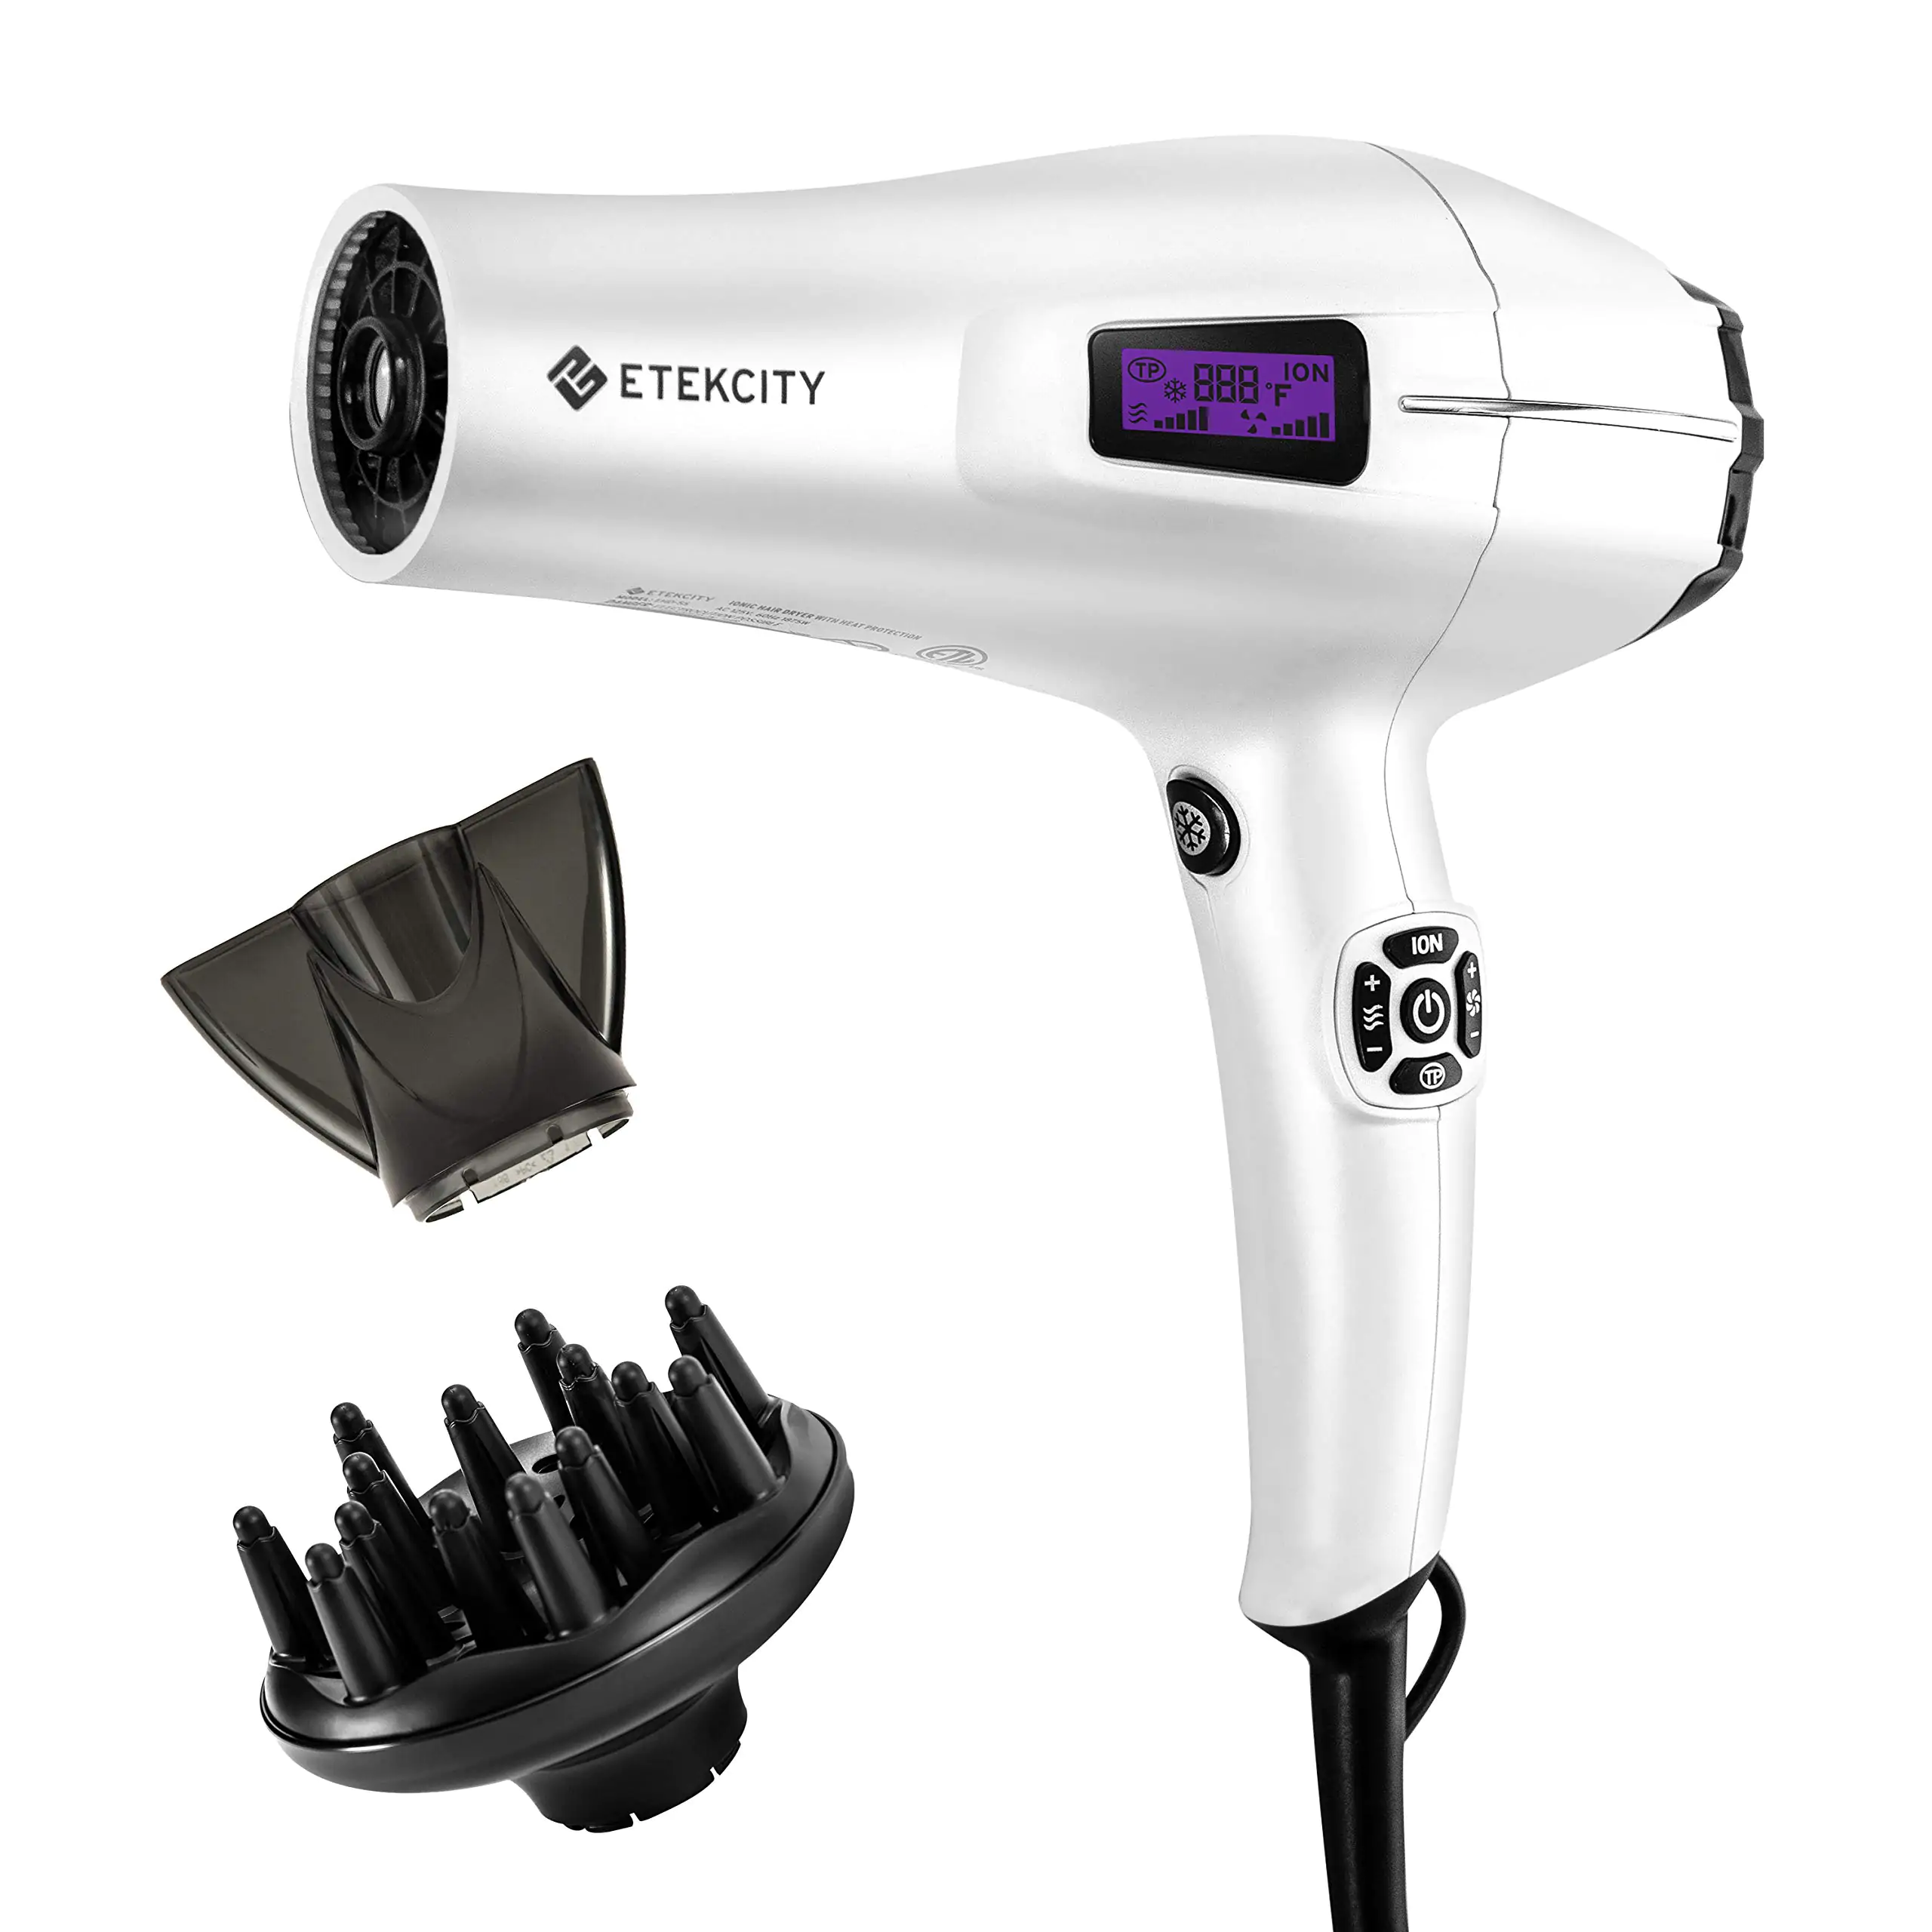 Tensky hair dryer the Game Changer of Intelligent Blow Dryer